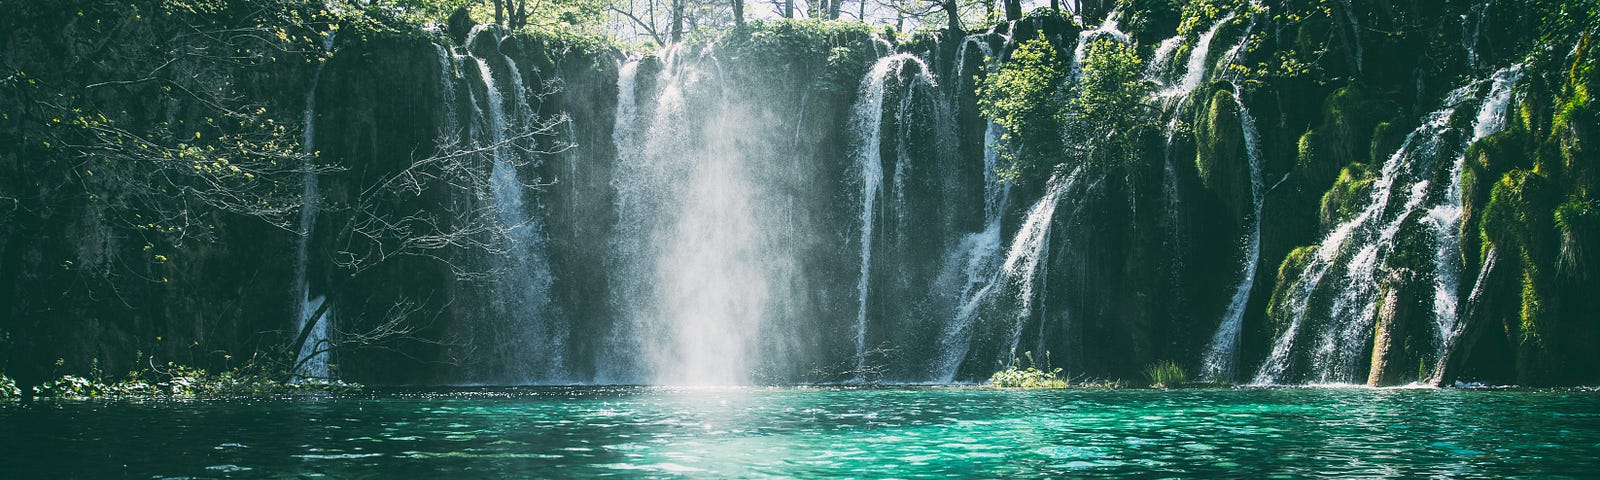 A waterfall at the end of a green-colored pond.